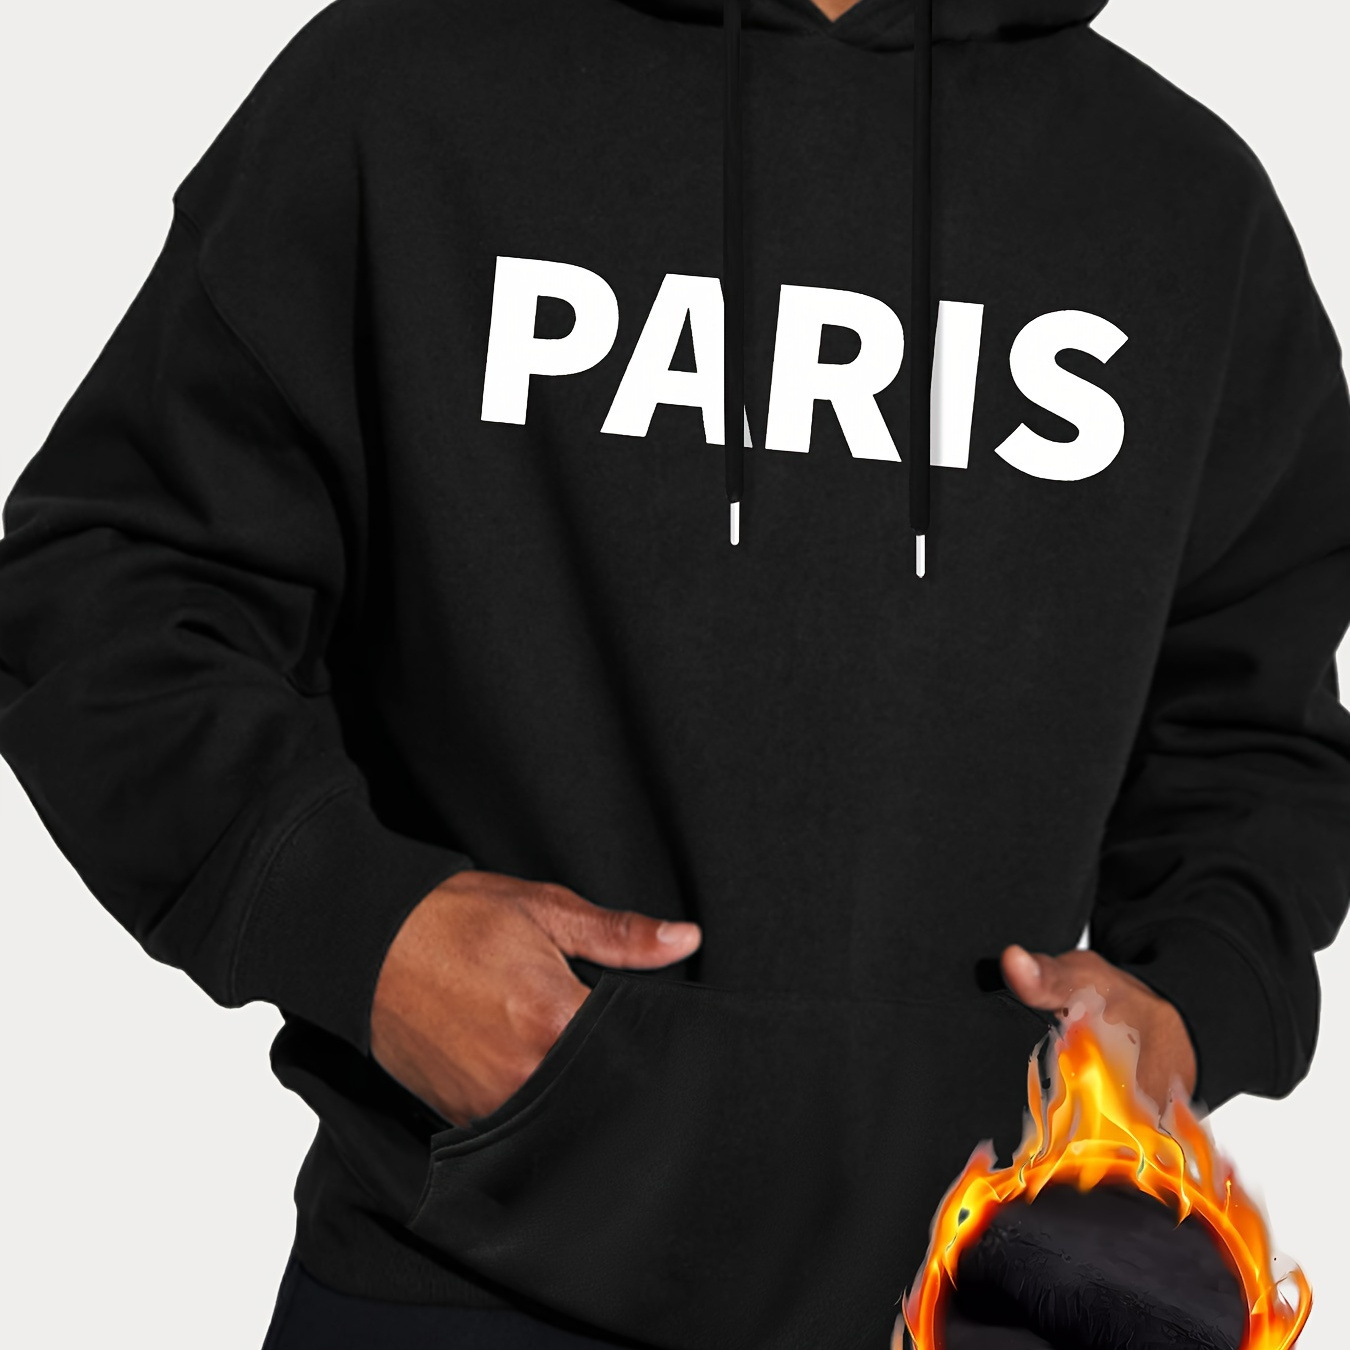 

Paris Print Sweatshirt, Men's Fleece Long Sleeve Hoodies Street Casual Sports And Fashionable With Kangaroo Pocket, For Outdoor Sports, For Autumn Winter, Warm And Cozy